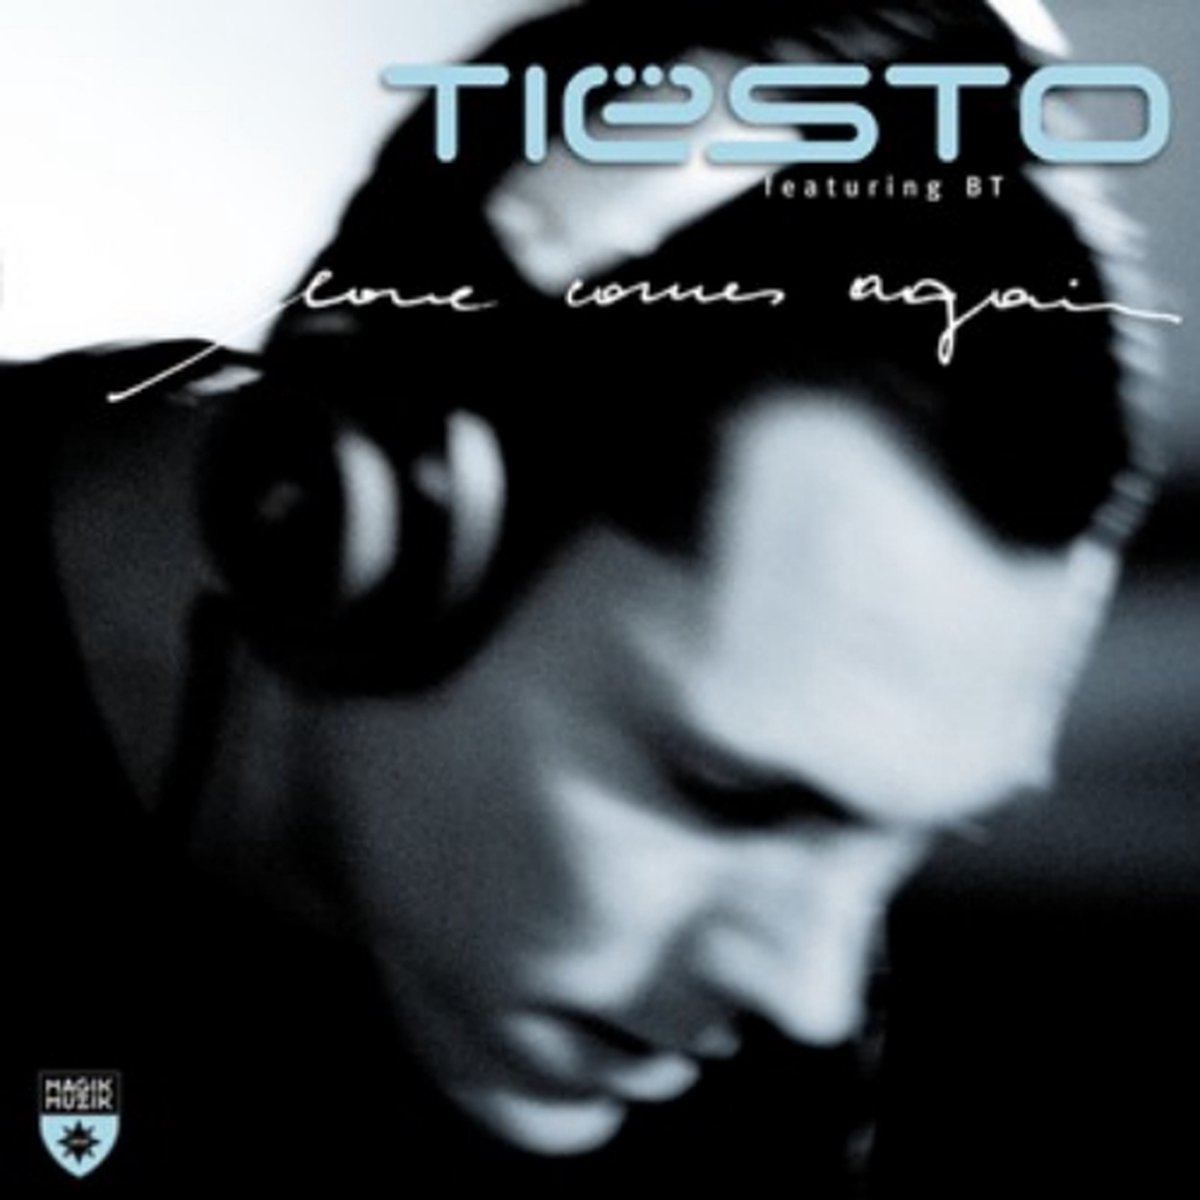 Love Comes Again - Tiesto Featuring Bt